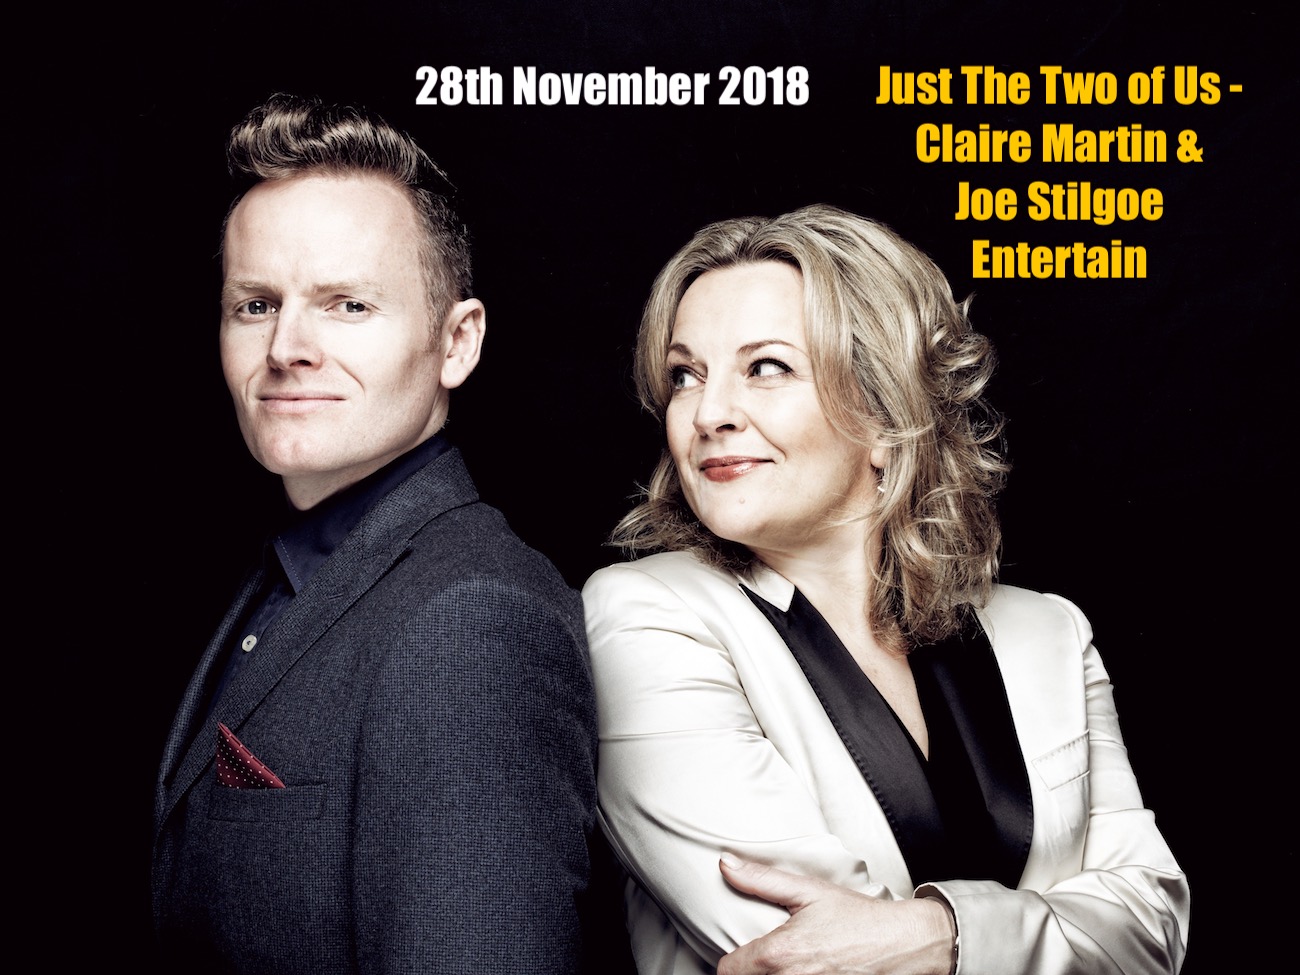 Just The Two Of Us - Claire Martin & Joe Stilgoe Entertain